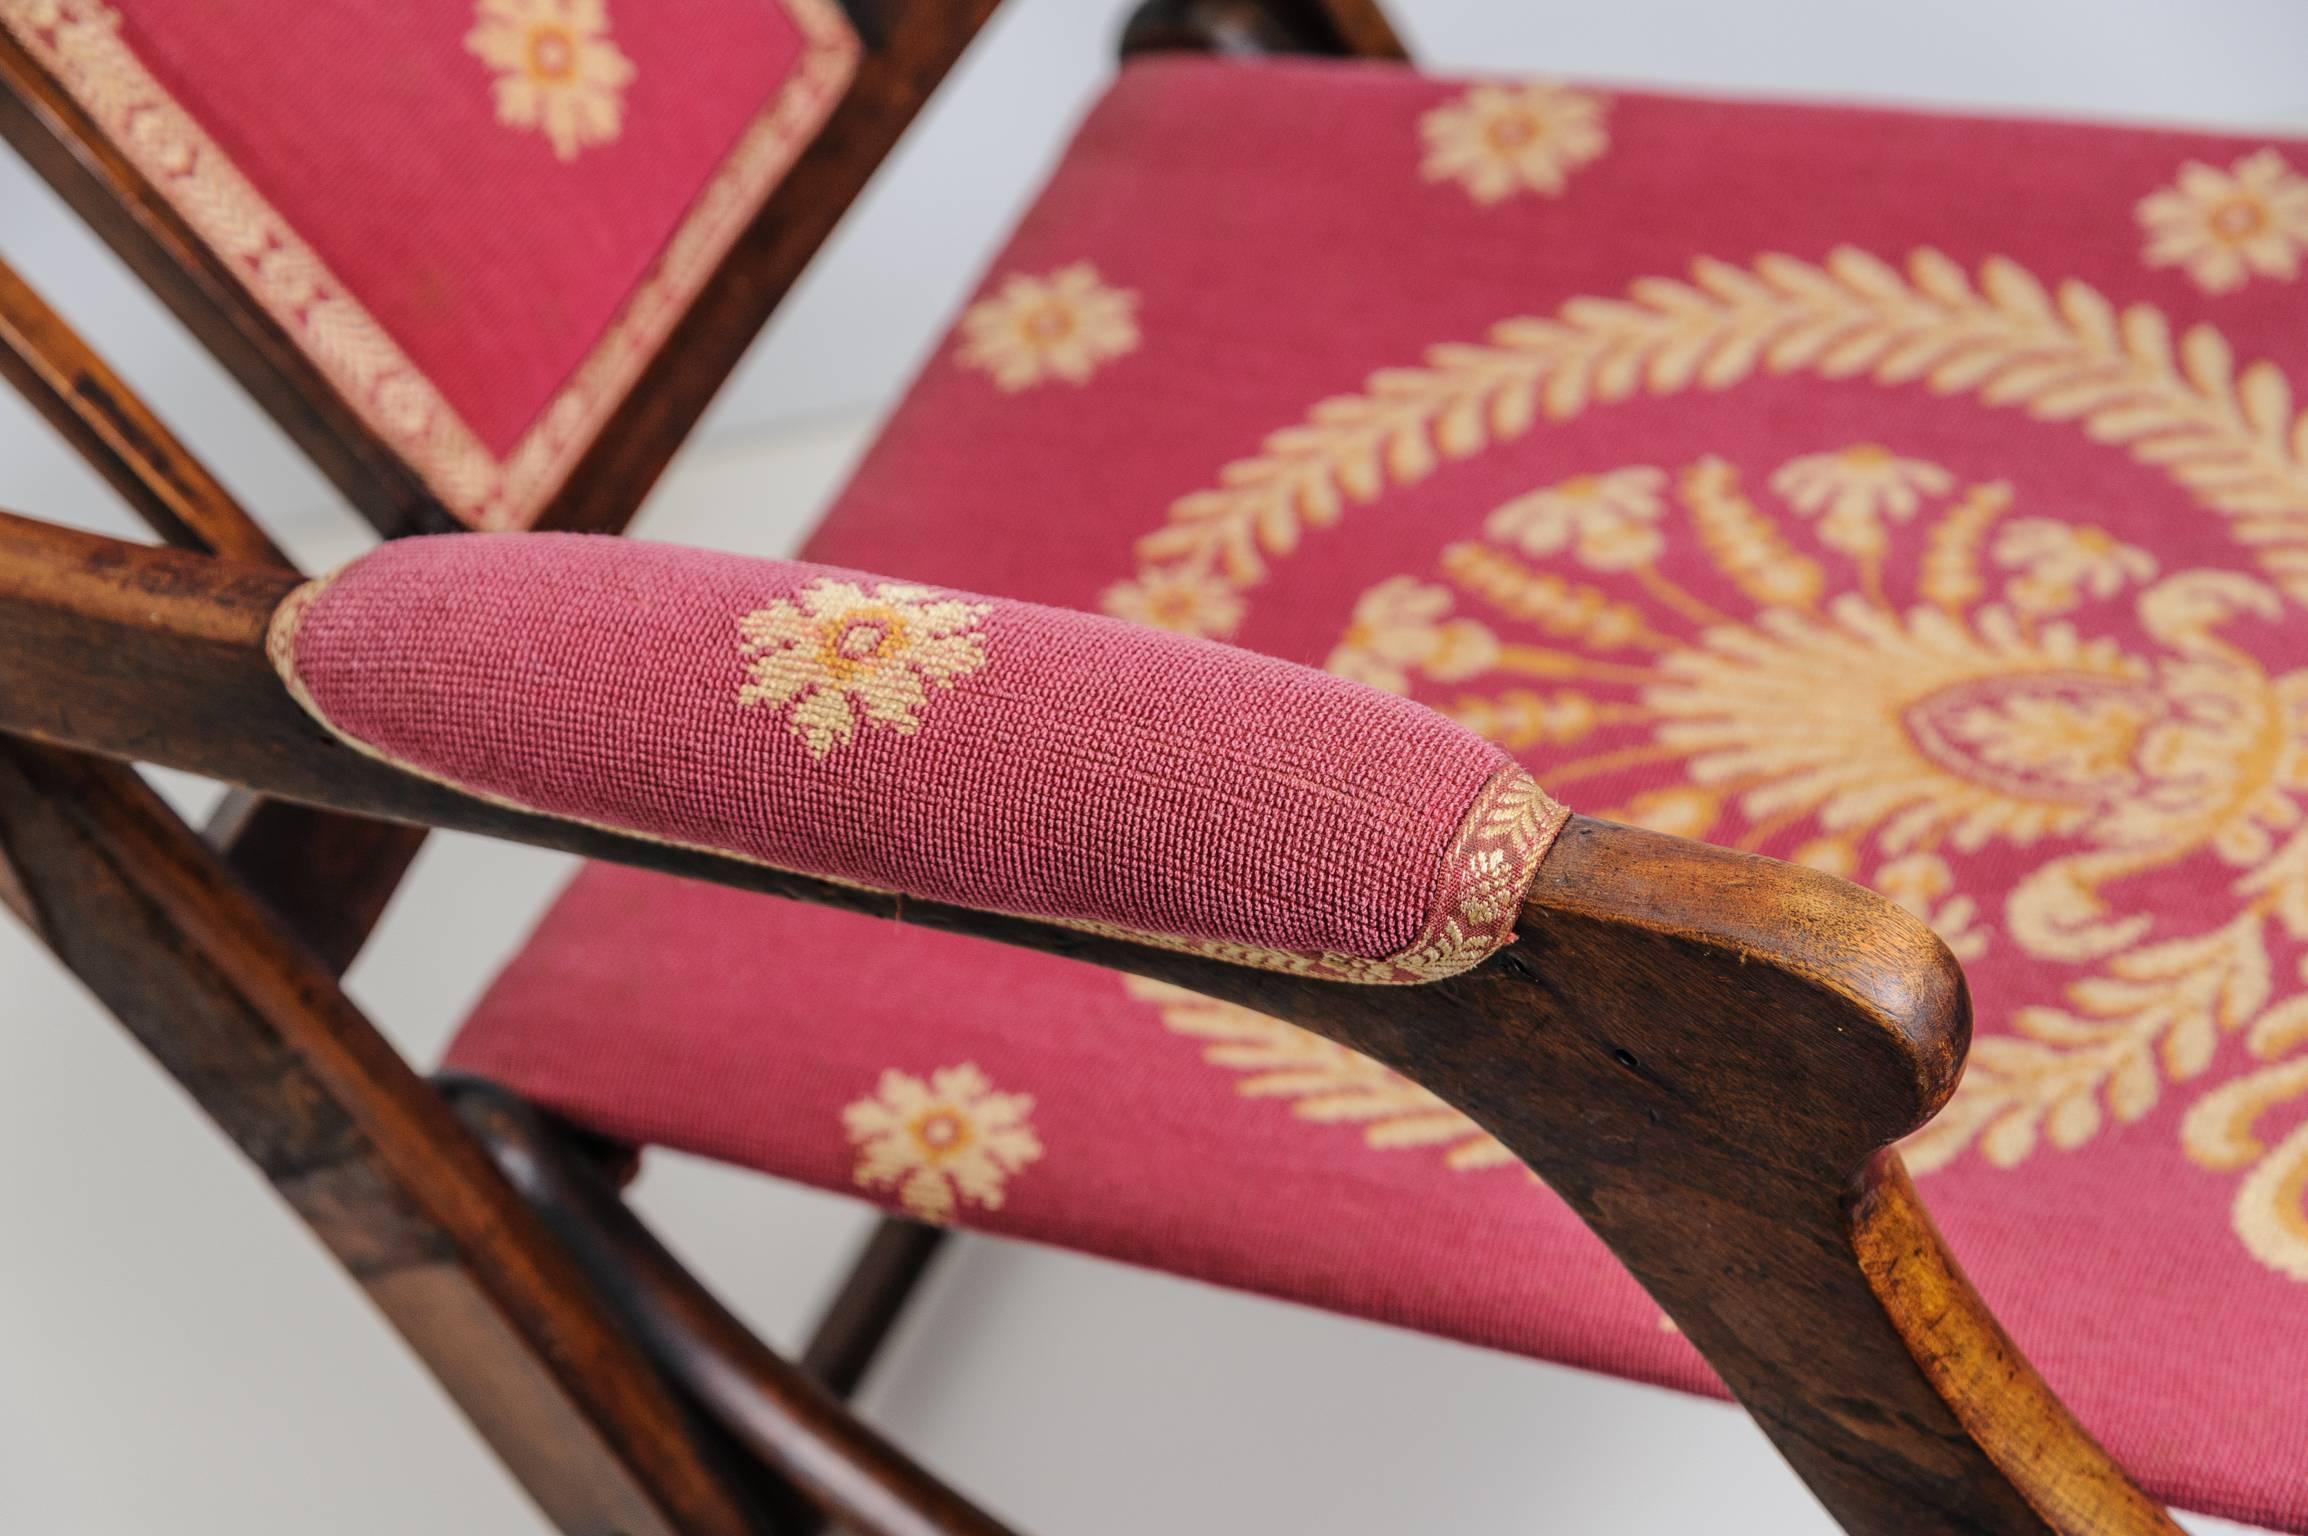 This 19th century campaign style chair was purchased in France and is made of walnut. The woven upholstery fabric is a gros point technique in a muted salmon red and two-tone gold coloration. The central seat medallion is a stylized crown with